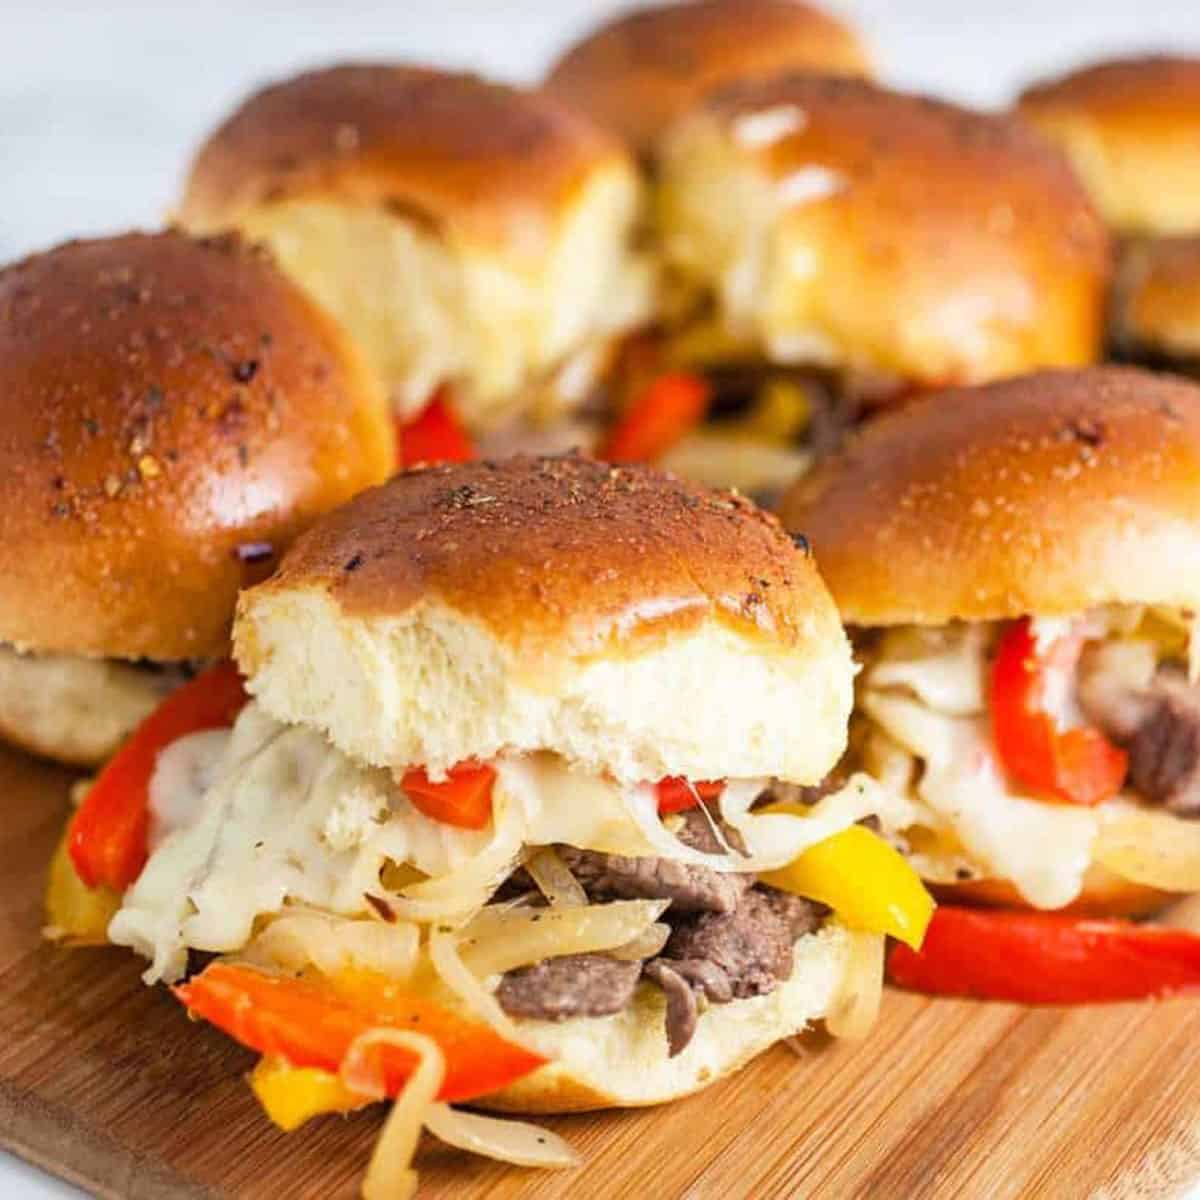 Philly cheesesteak sliders on a wooden board up close